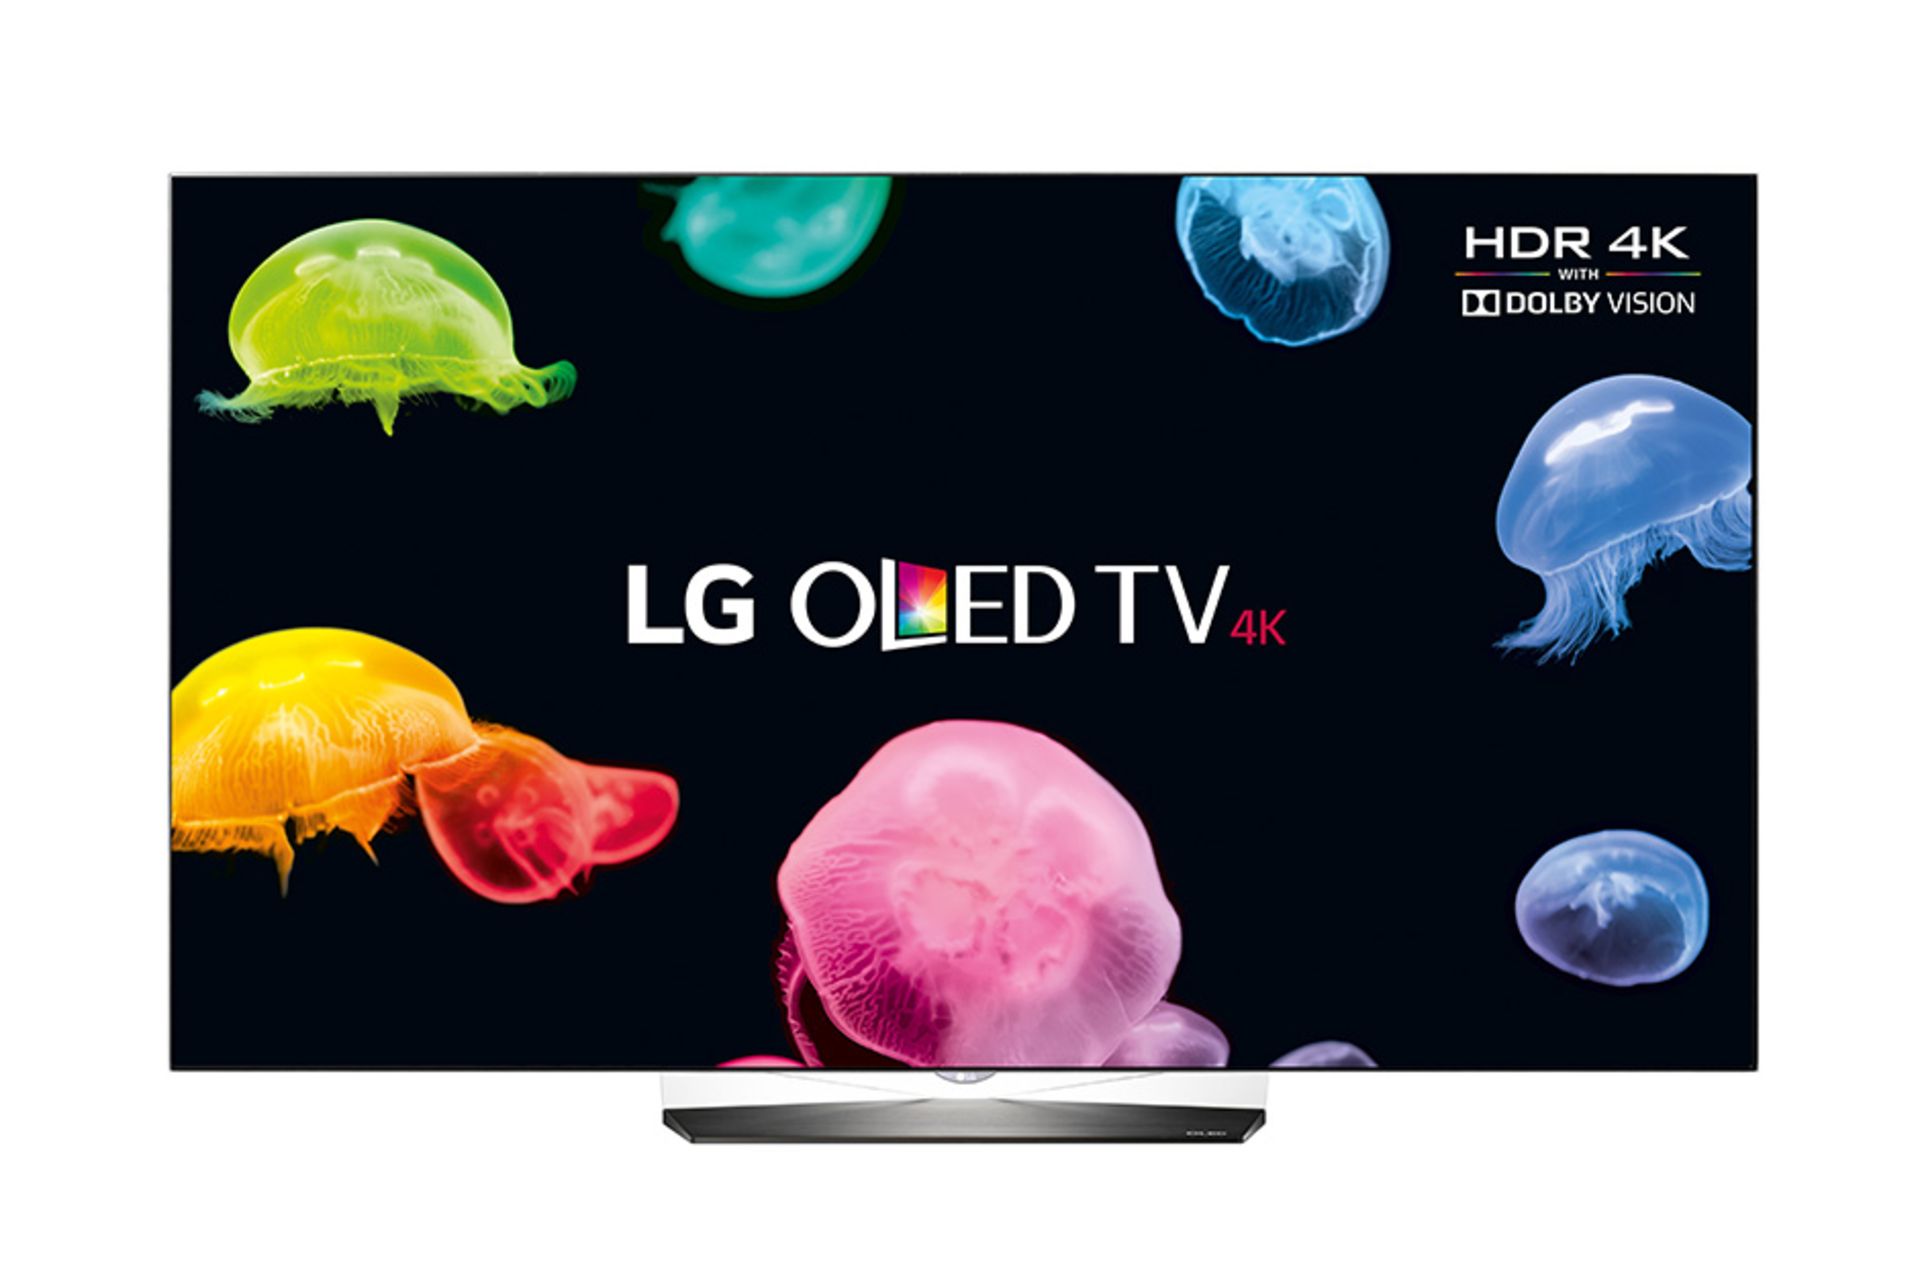 V Grade A LG 55" OLED HDR 4K ULTRA HD SMART TV WITH FREEVIEW HD & WEBOS & WIFI - ULTRA SLIM DESIGN -